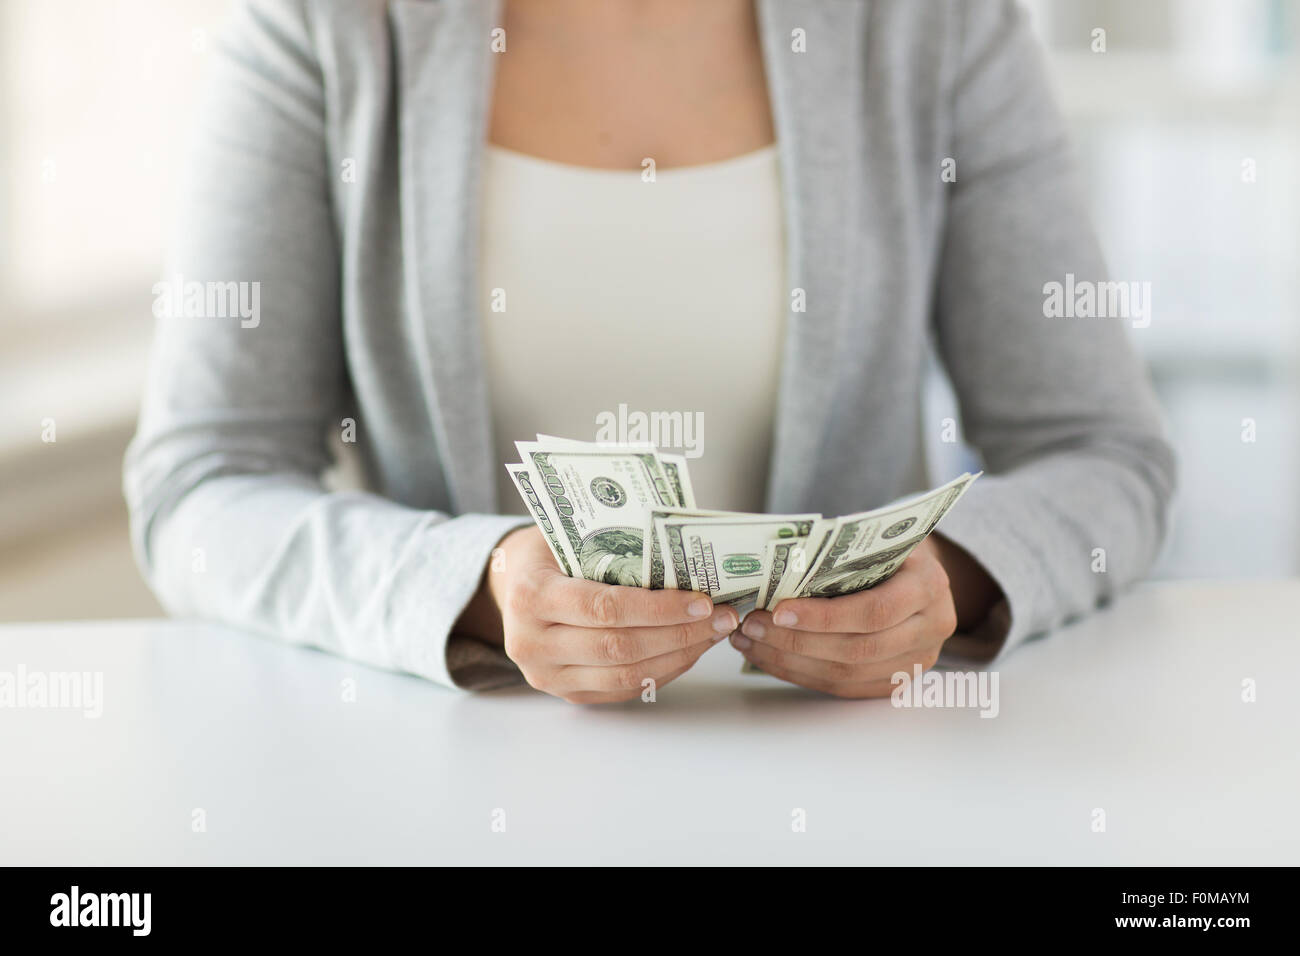 close up of woman hands counting us dollar money Stock Photo